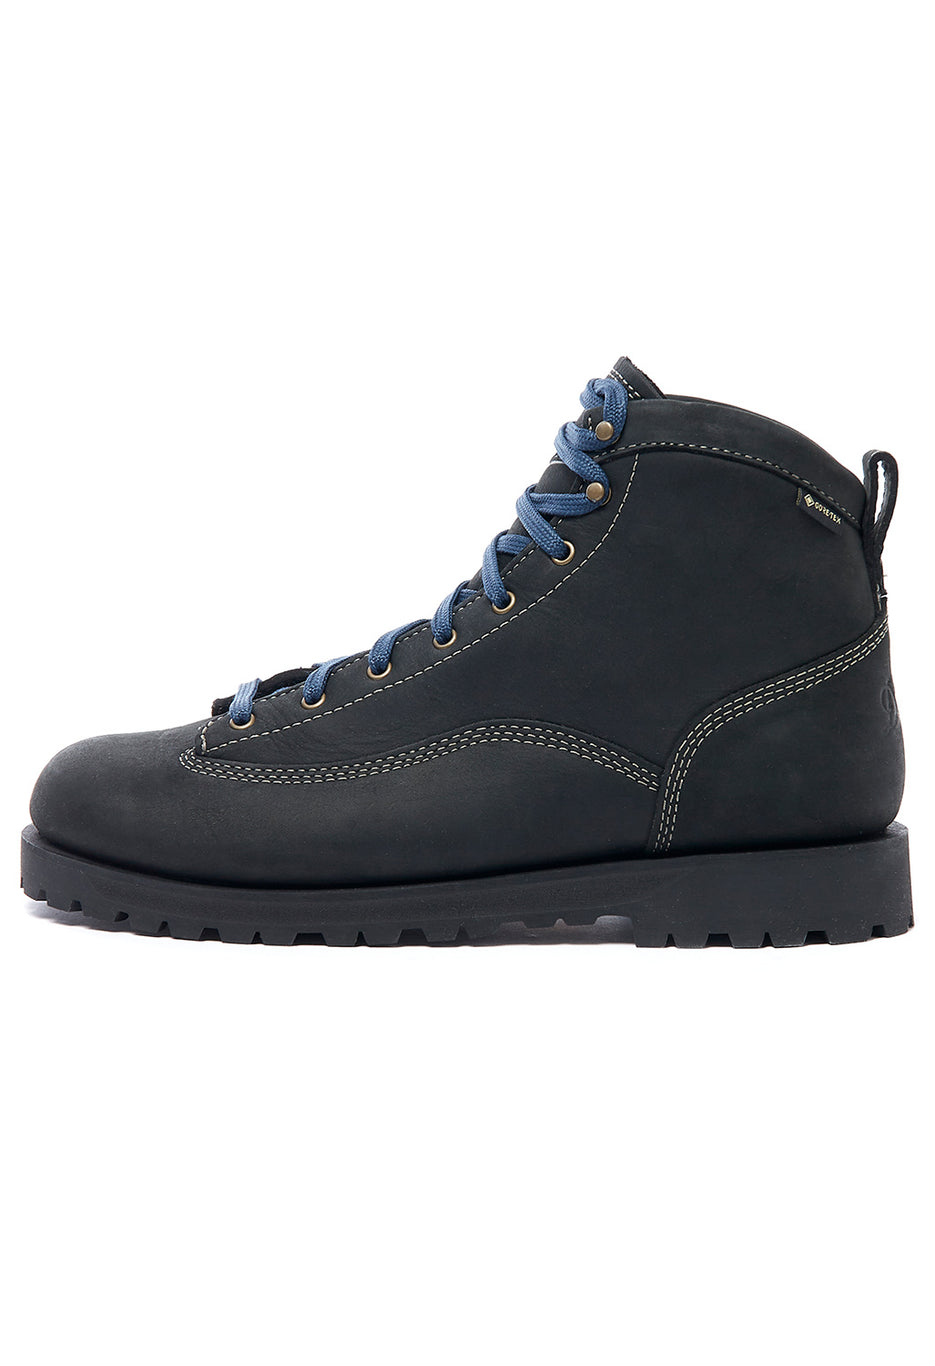 Men's Boots - Outsiders Store – Outsiders Store UK